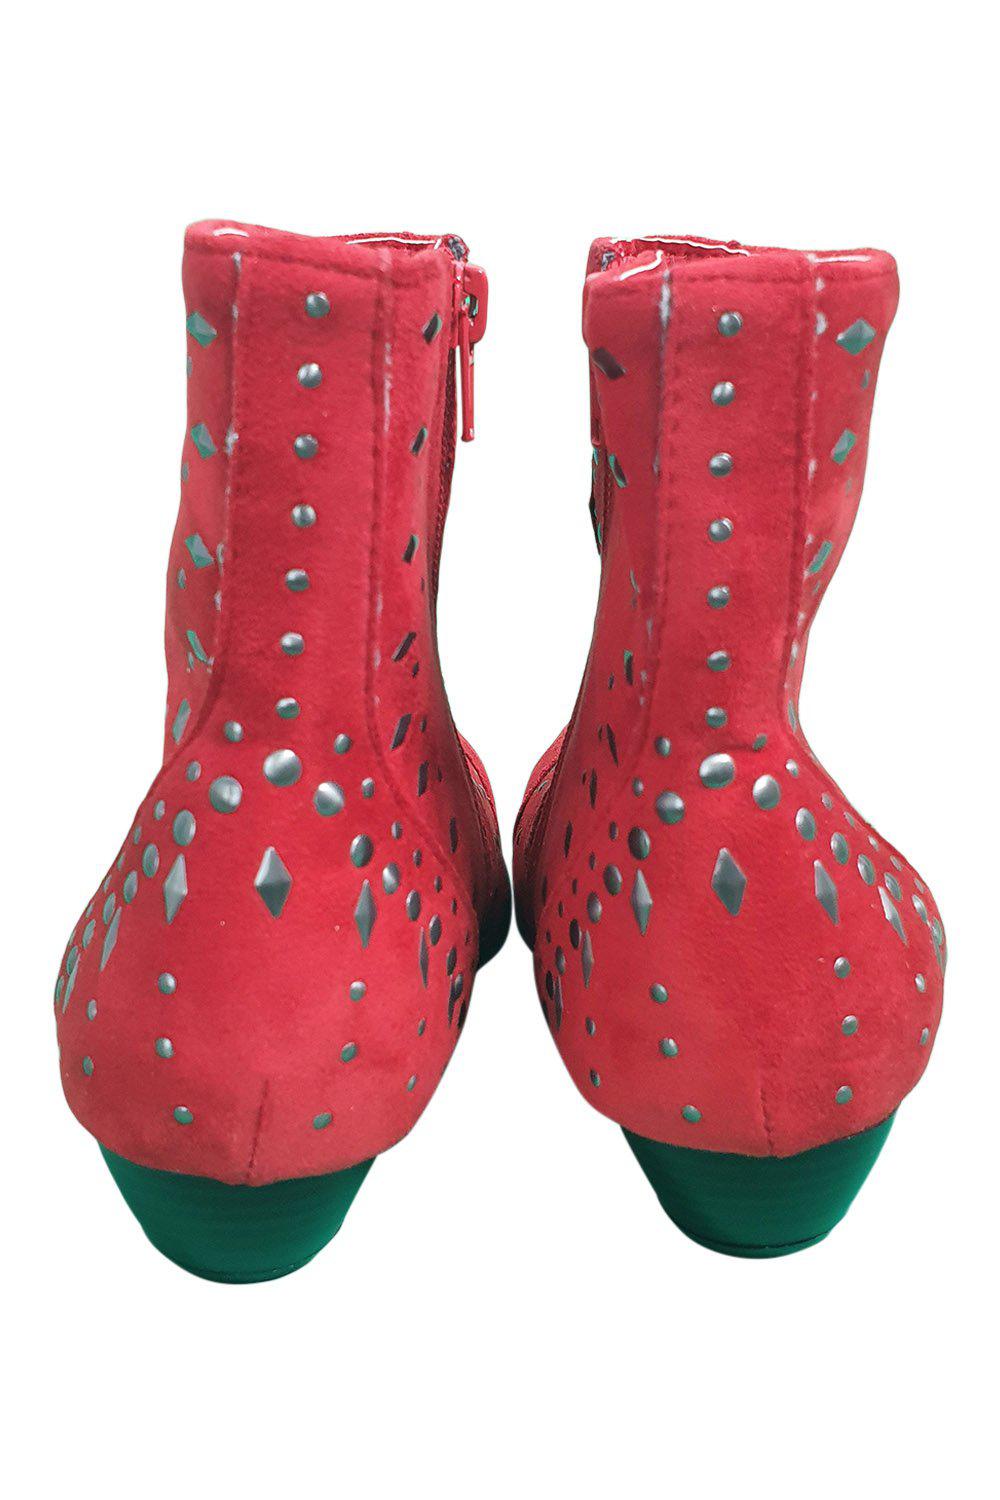 COCONUTS by Matisse Red Suede Studded Ankle Boots (US 6 | UK 3)-Matisse-The Freperie